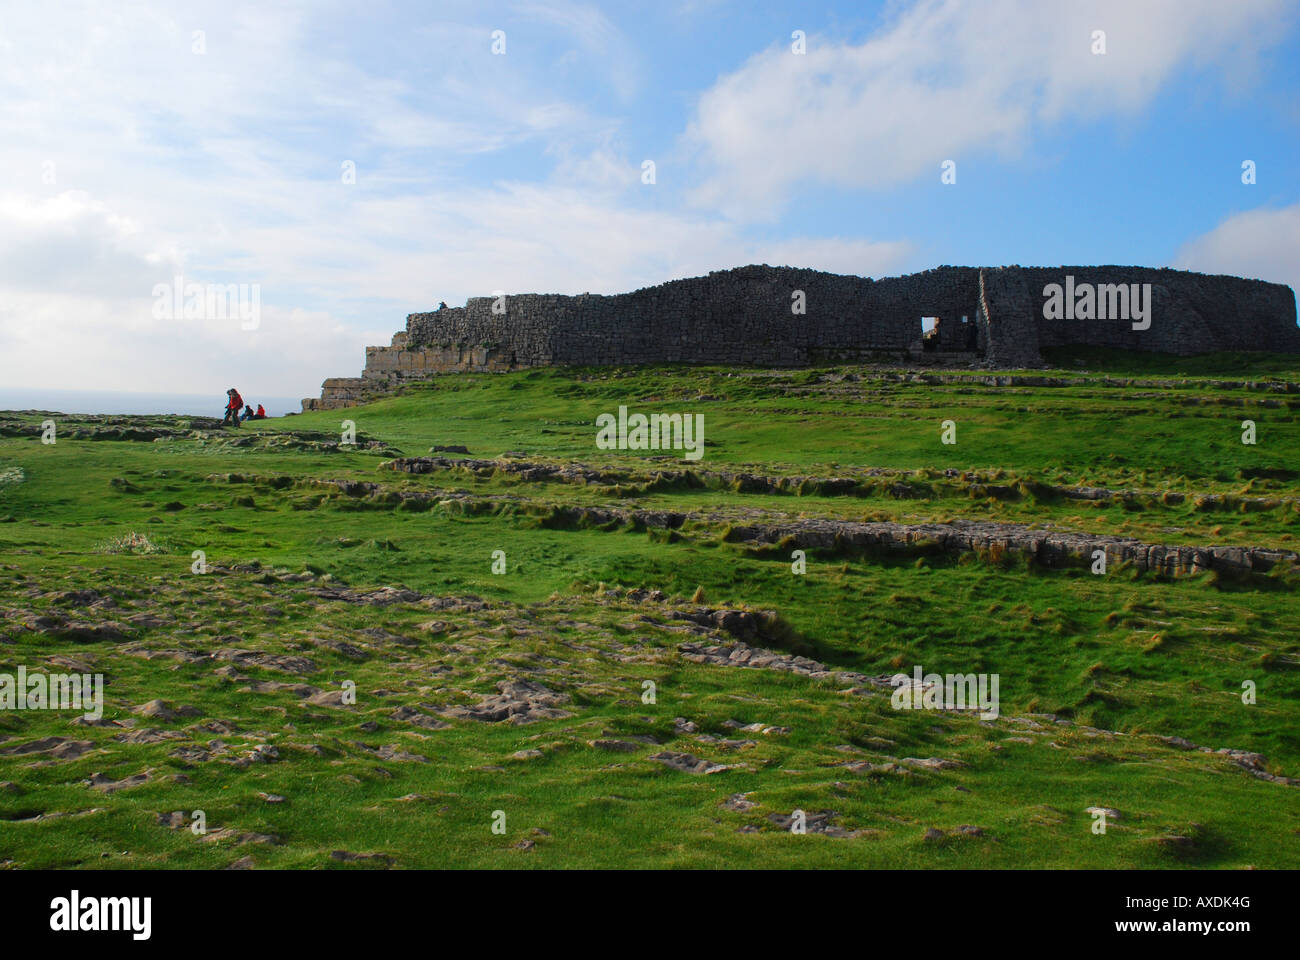 On the path to Dun Aenghus fort on Inishmore in the Aran Islands, Ireland. Stock Photo